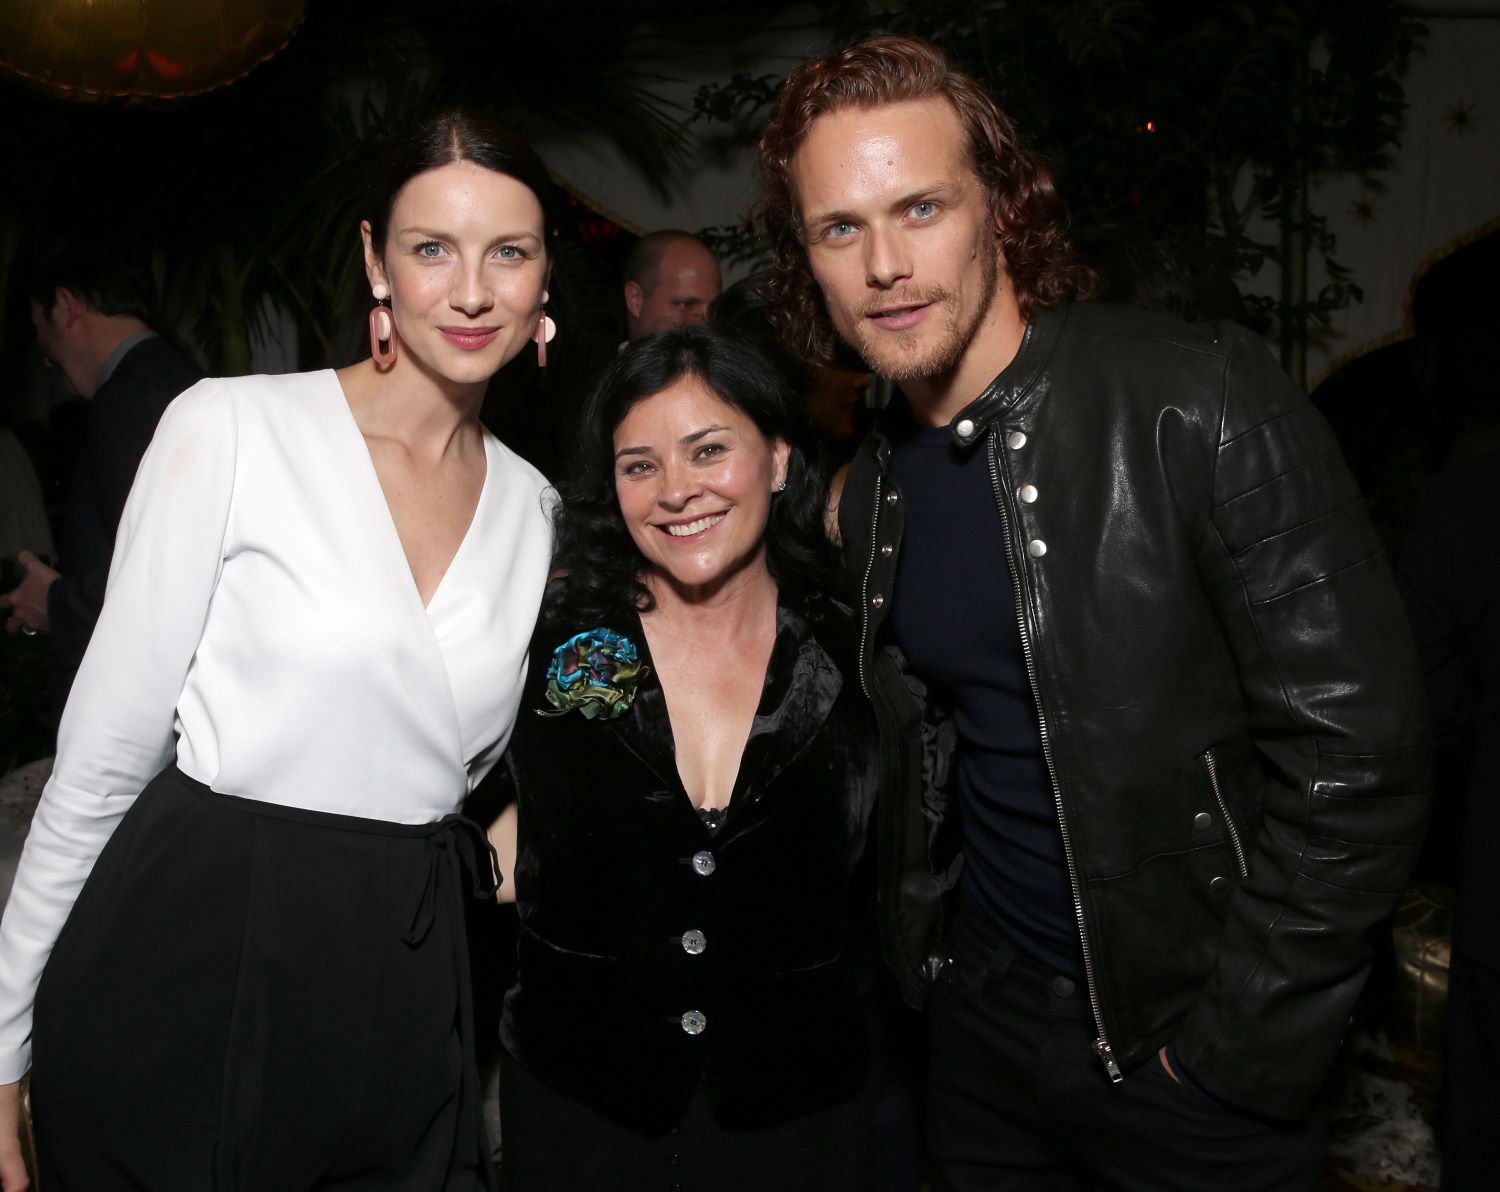 'Outlander' stars Caitriona Balfe and Sam Heughan with author Diana Gabaldon attend the Starz Pre-Golden Globe Celebration at Chateau Marmont on January 8, 2016